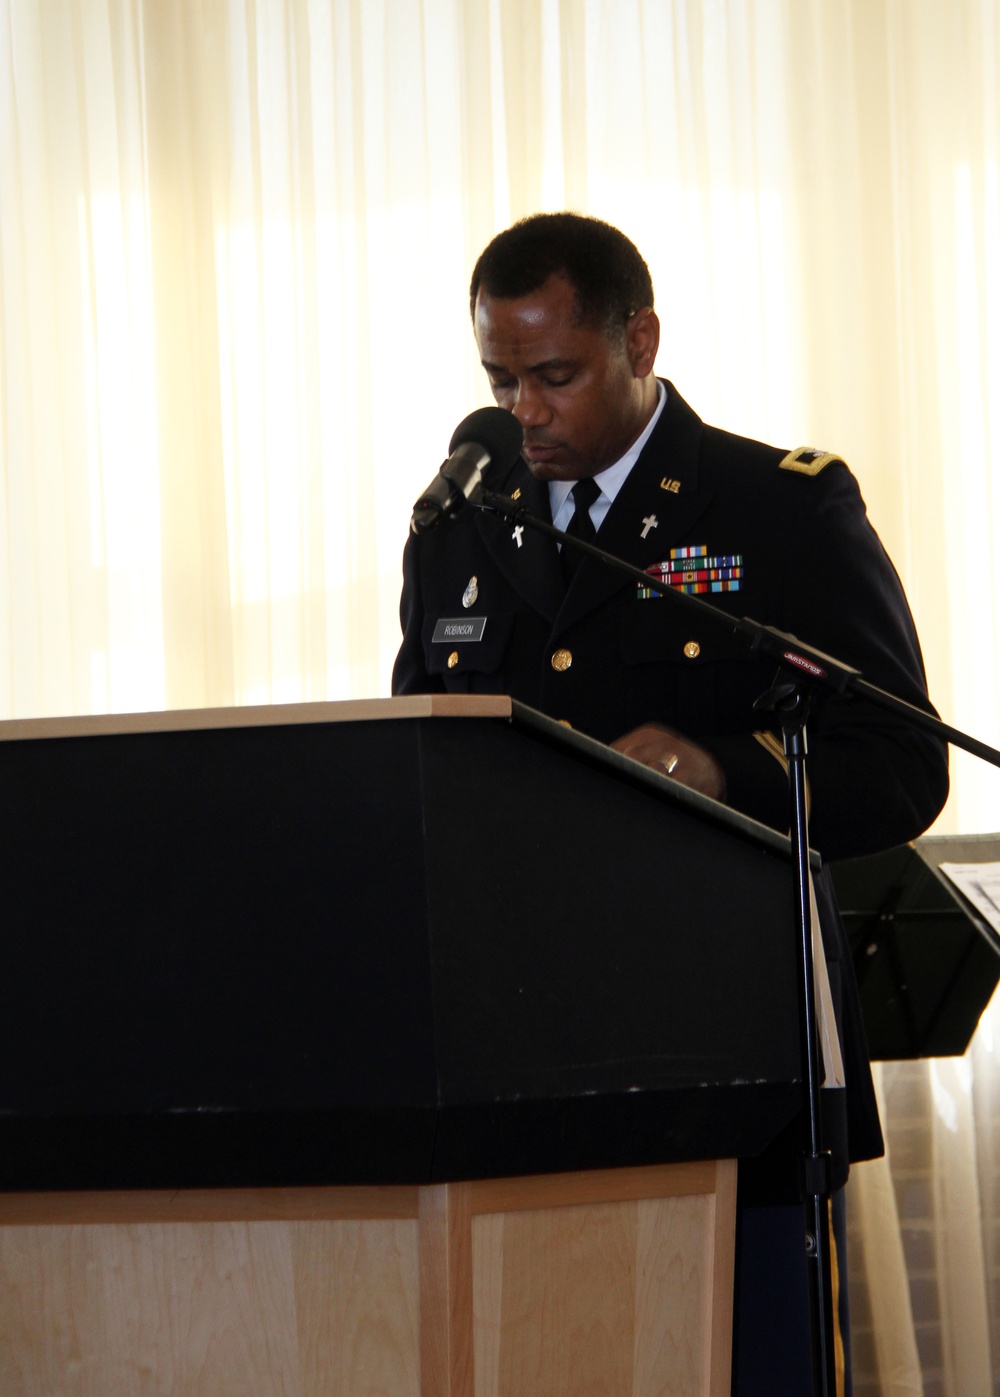 Army Corps of Engineers chaplain gives change-of-command invocation